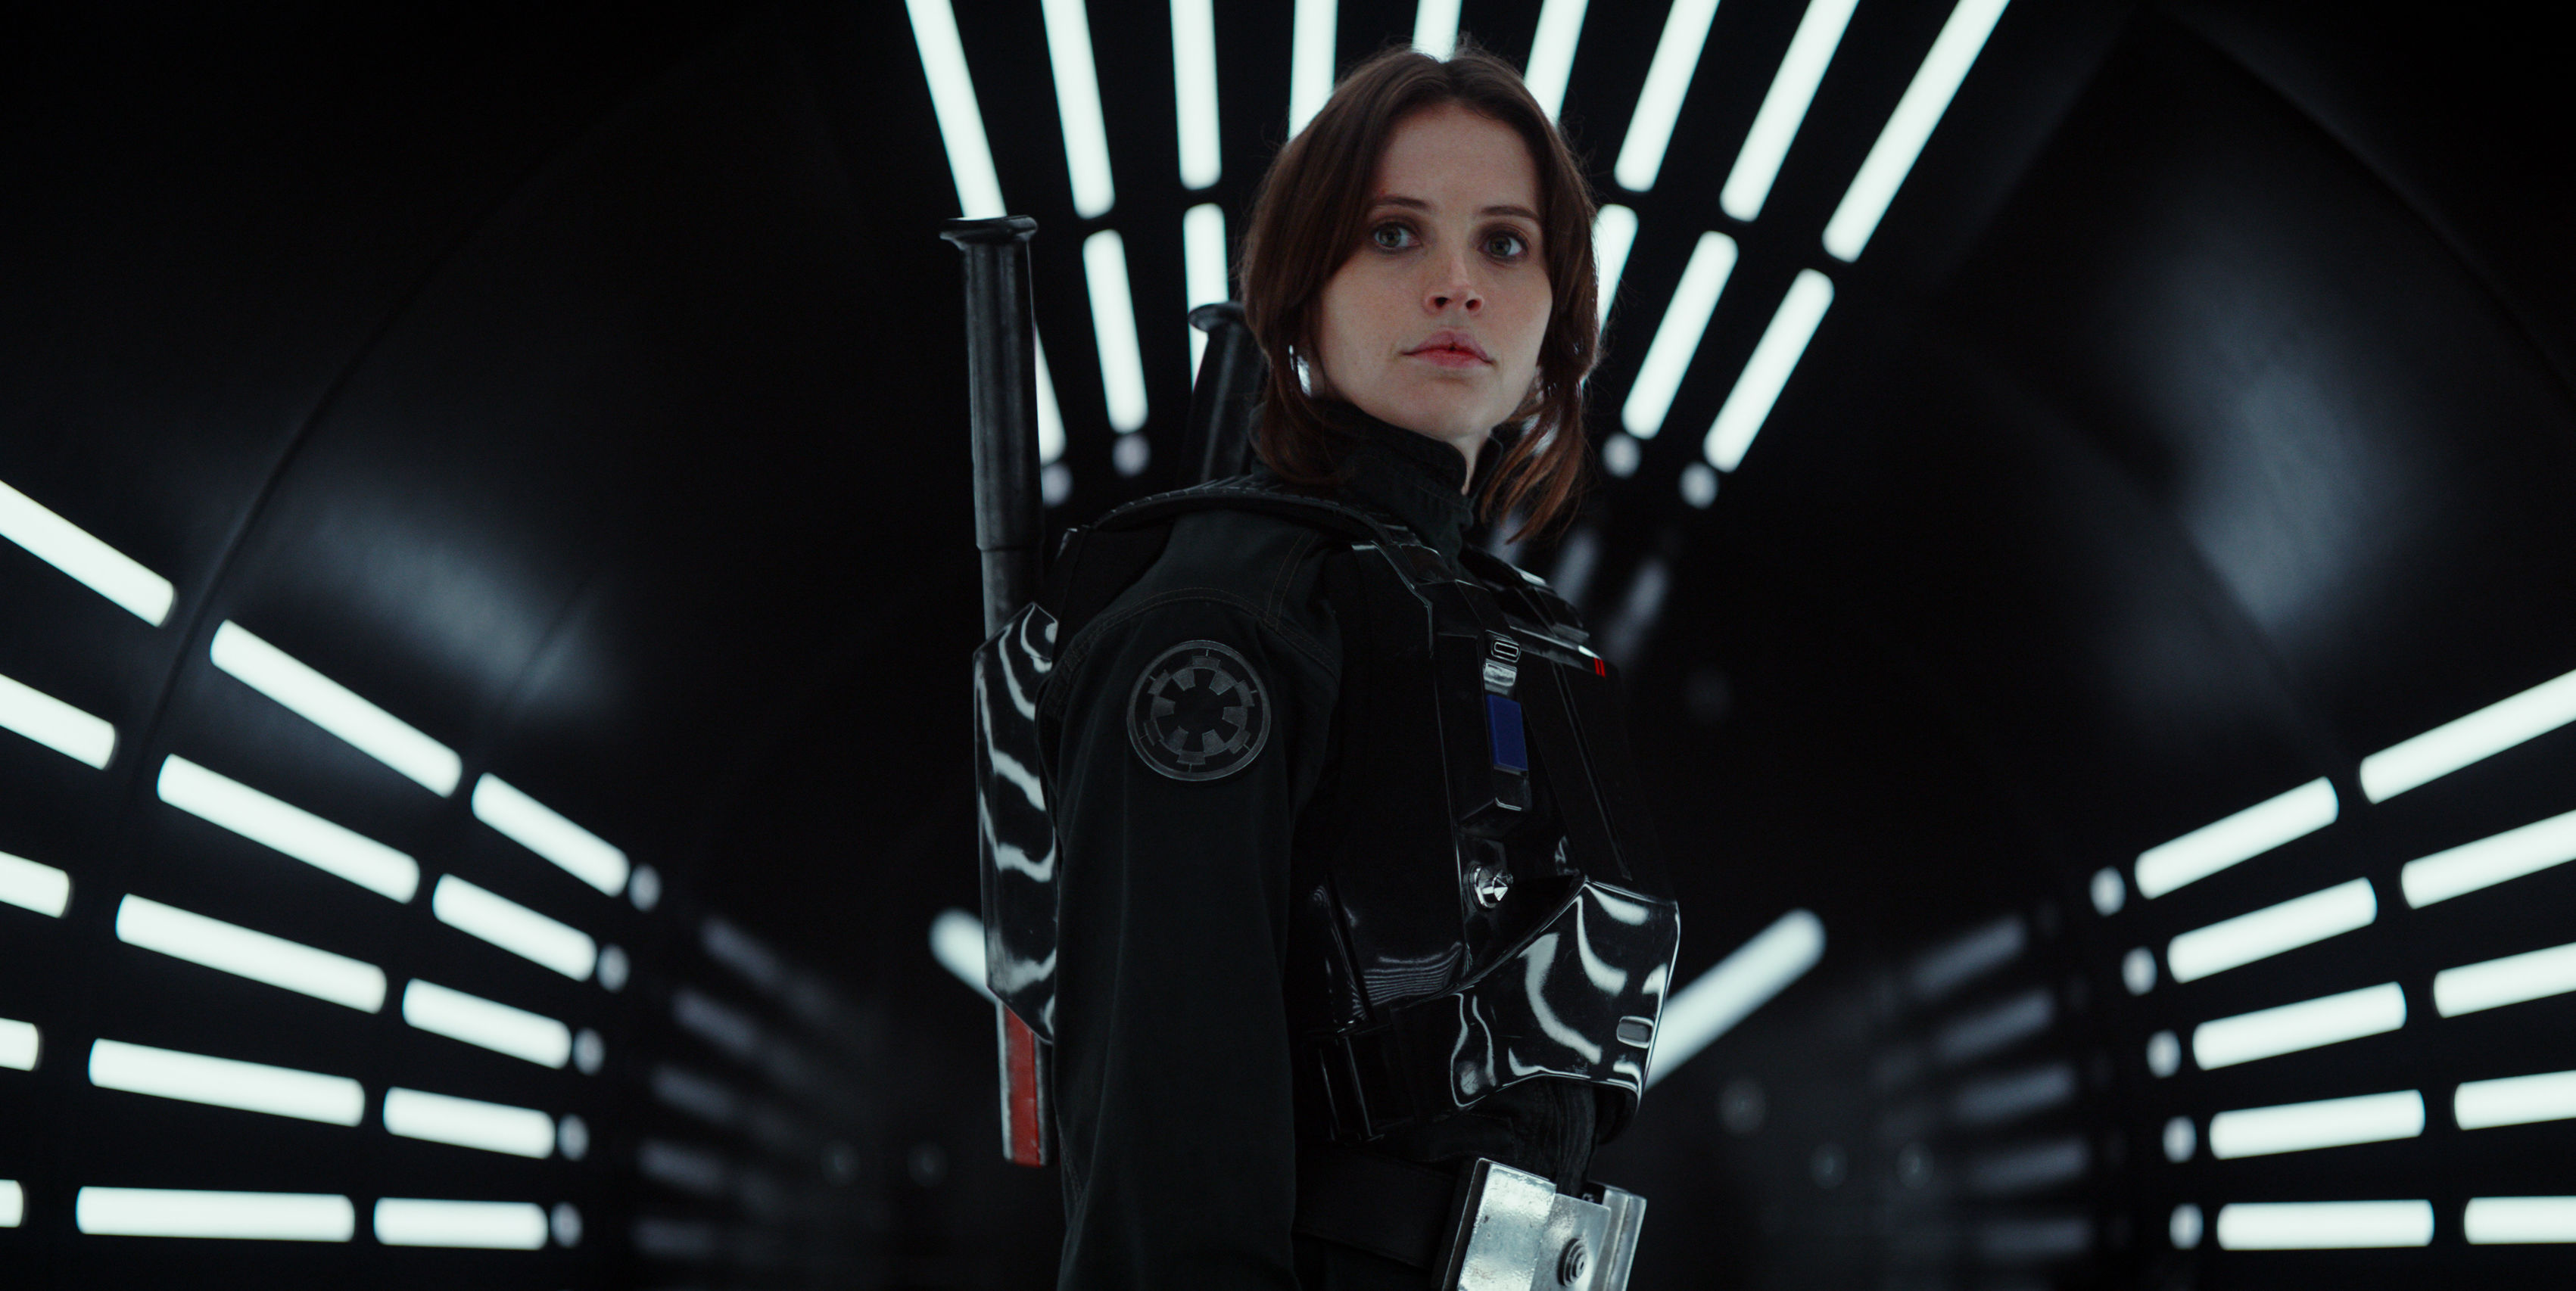 [Watch] Rogue One: A Star Wars Story official trailer #2